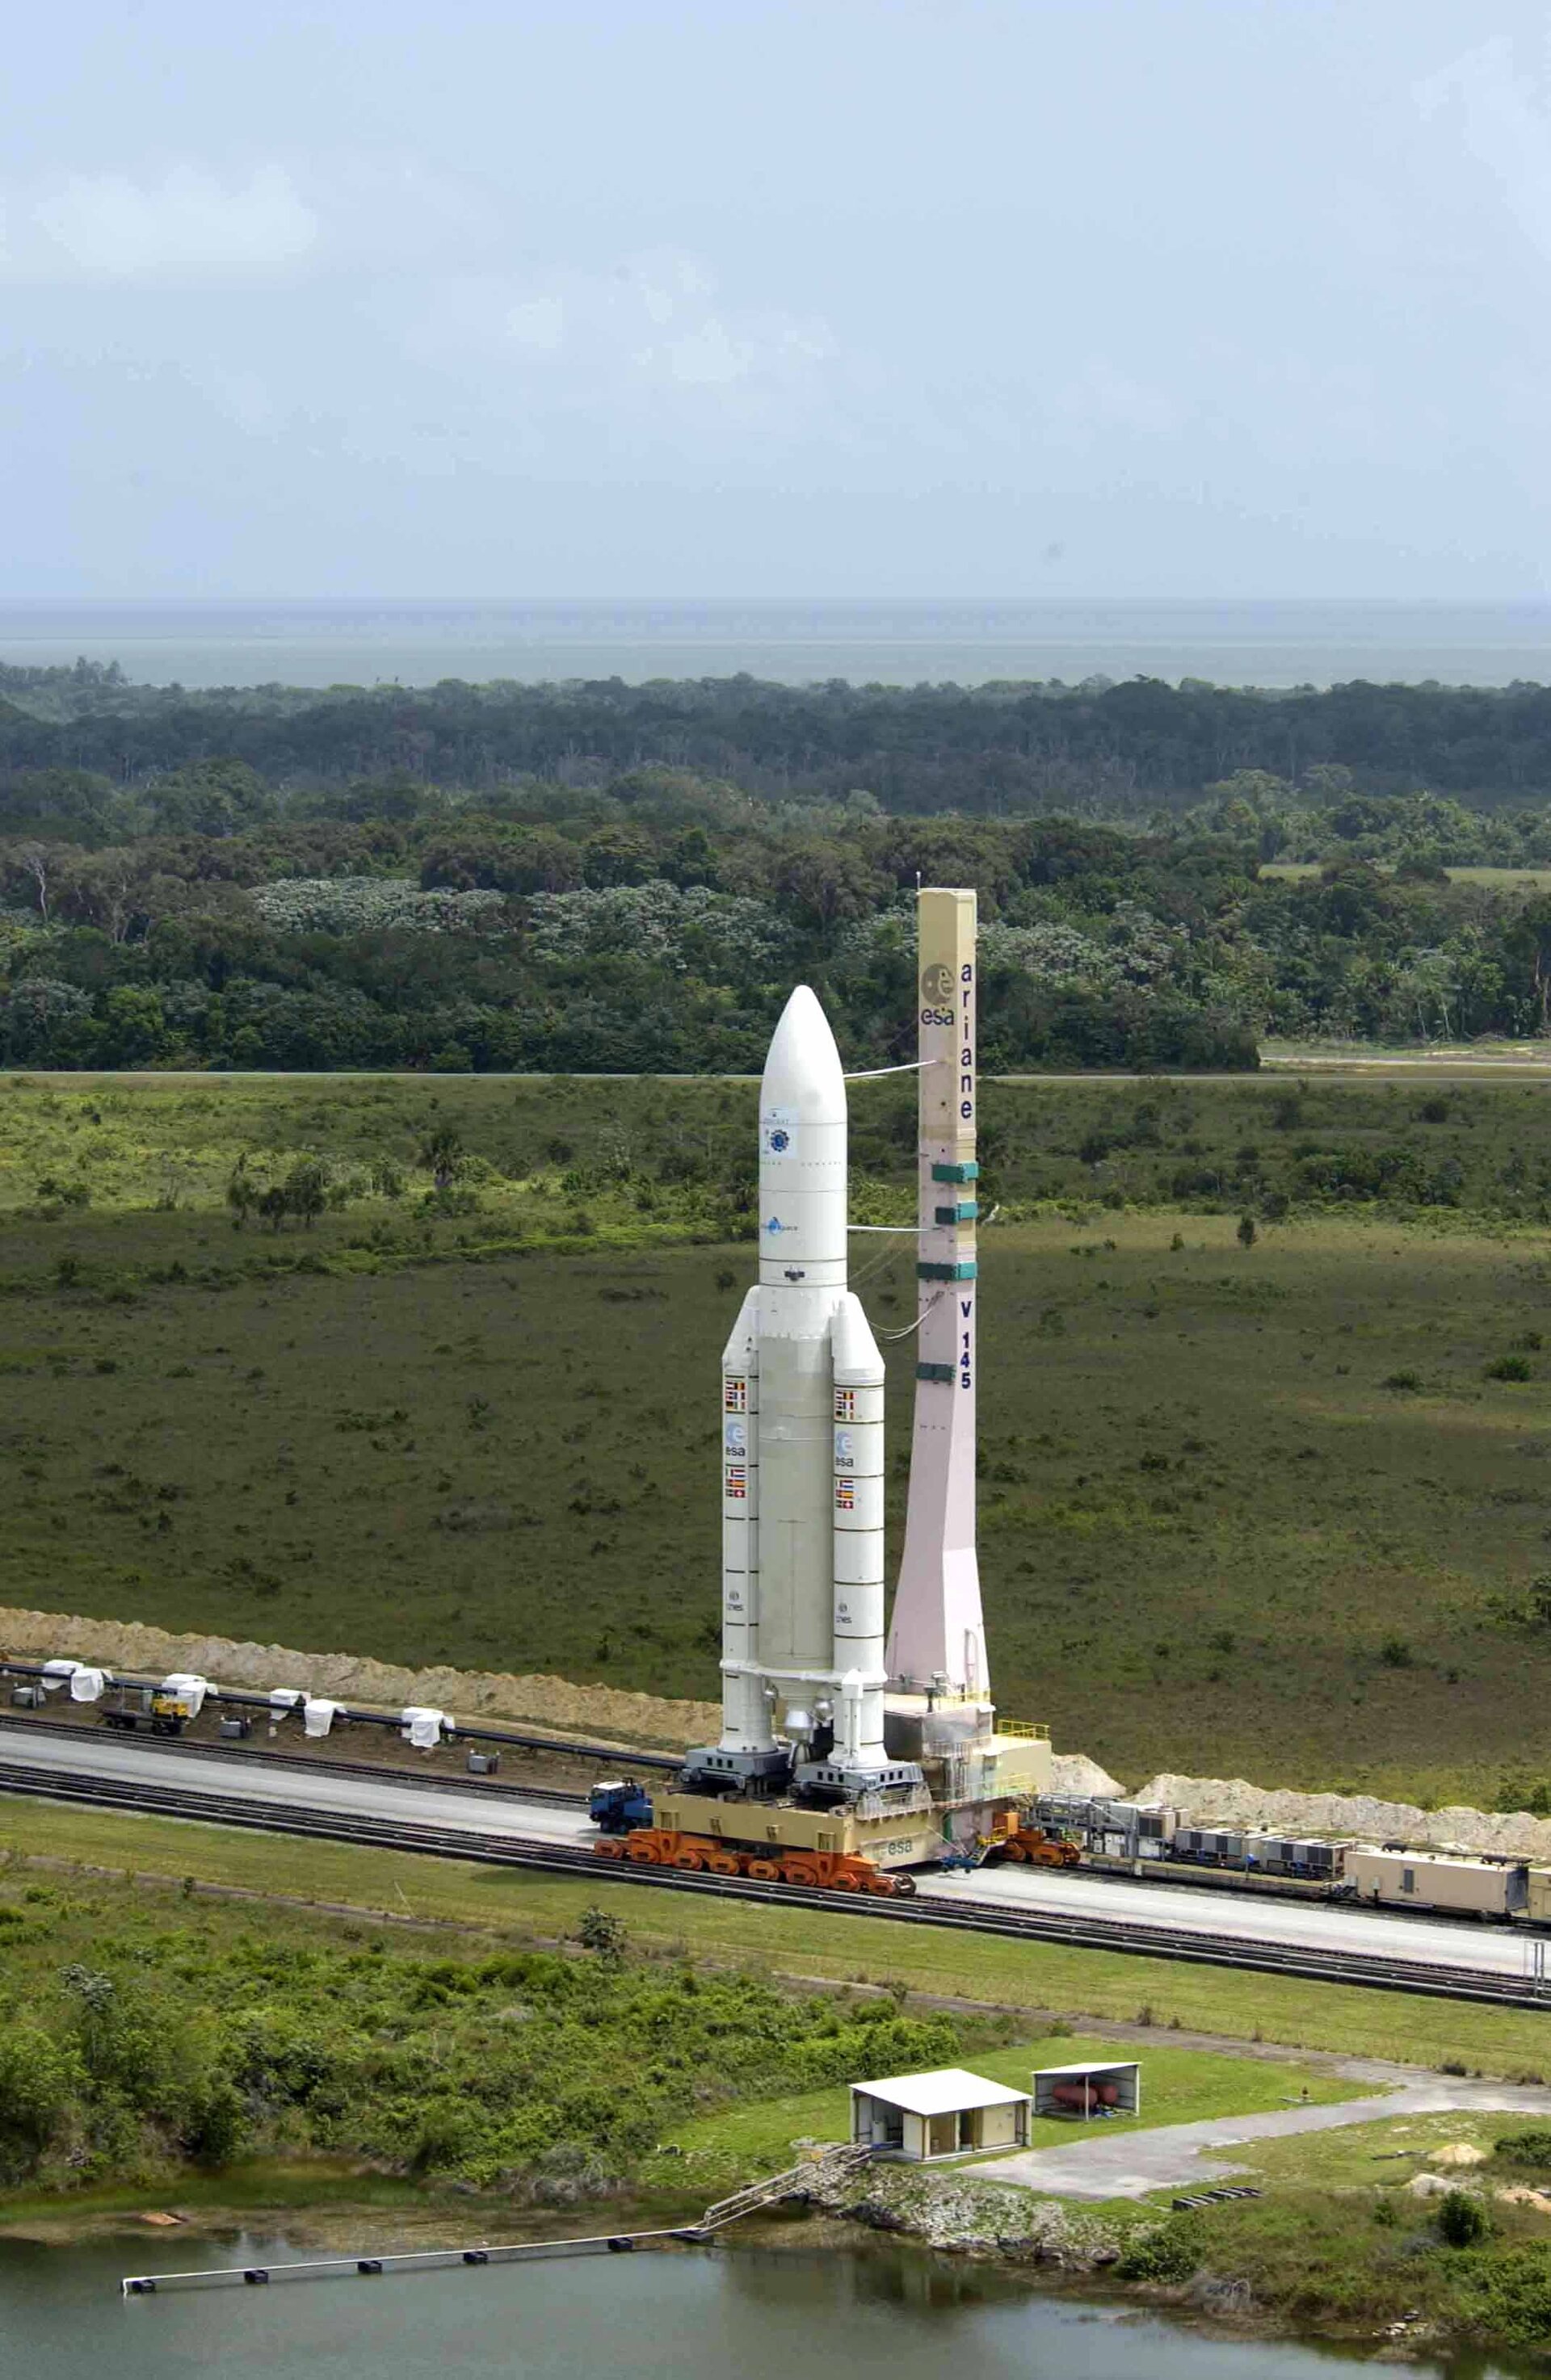 Roll-out of Ariane 5 with Envisat